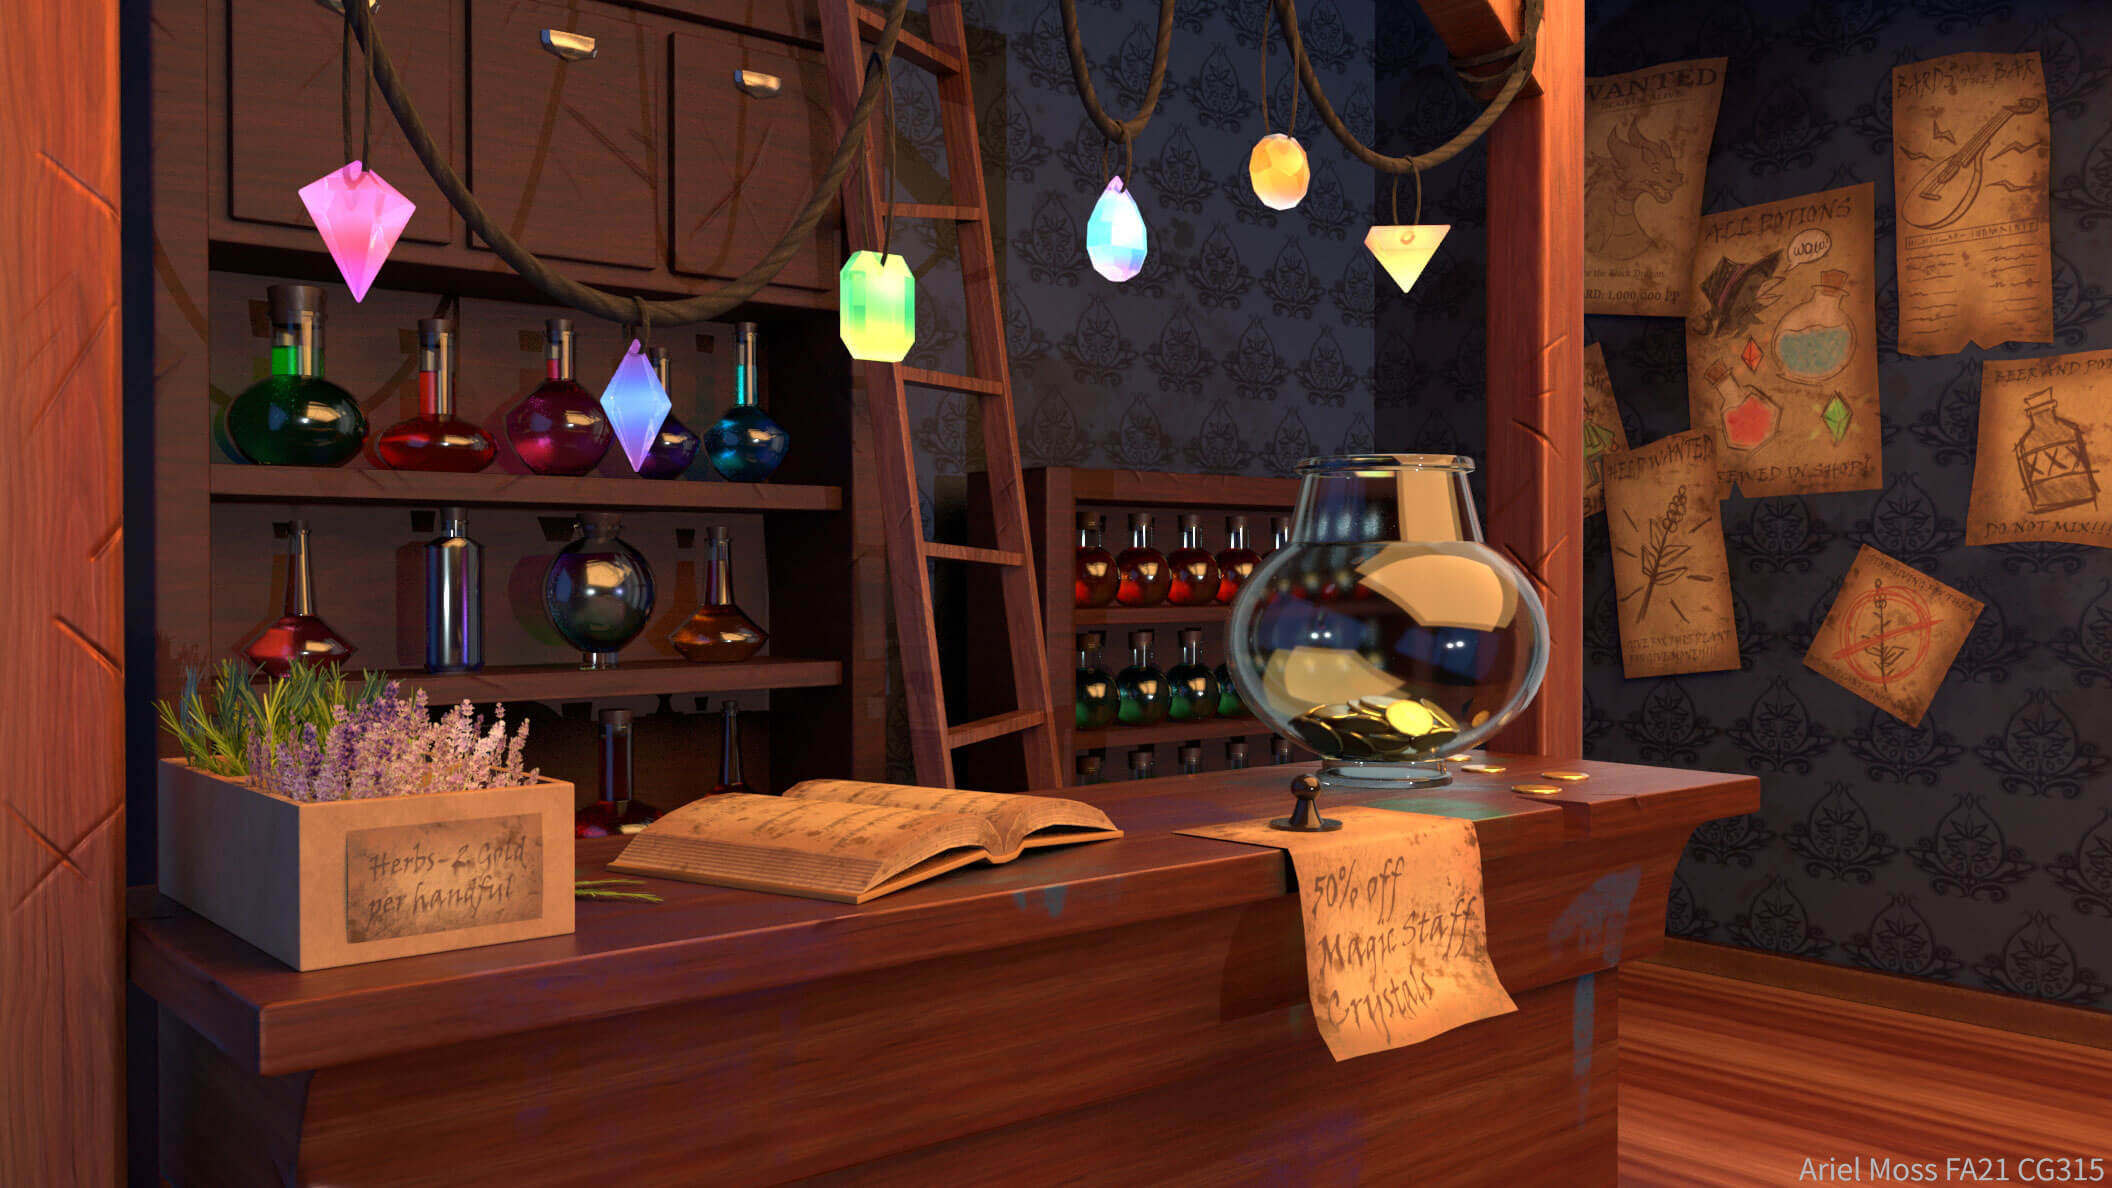 Interior of a magical potion shop viewing a front counter.